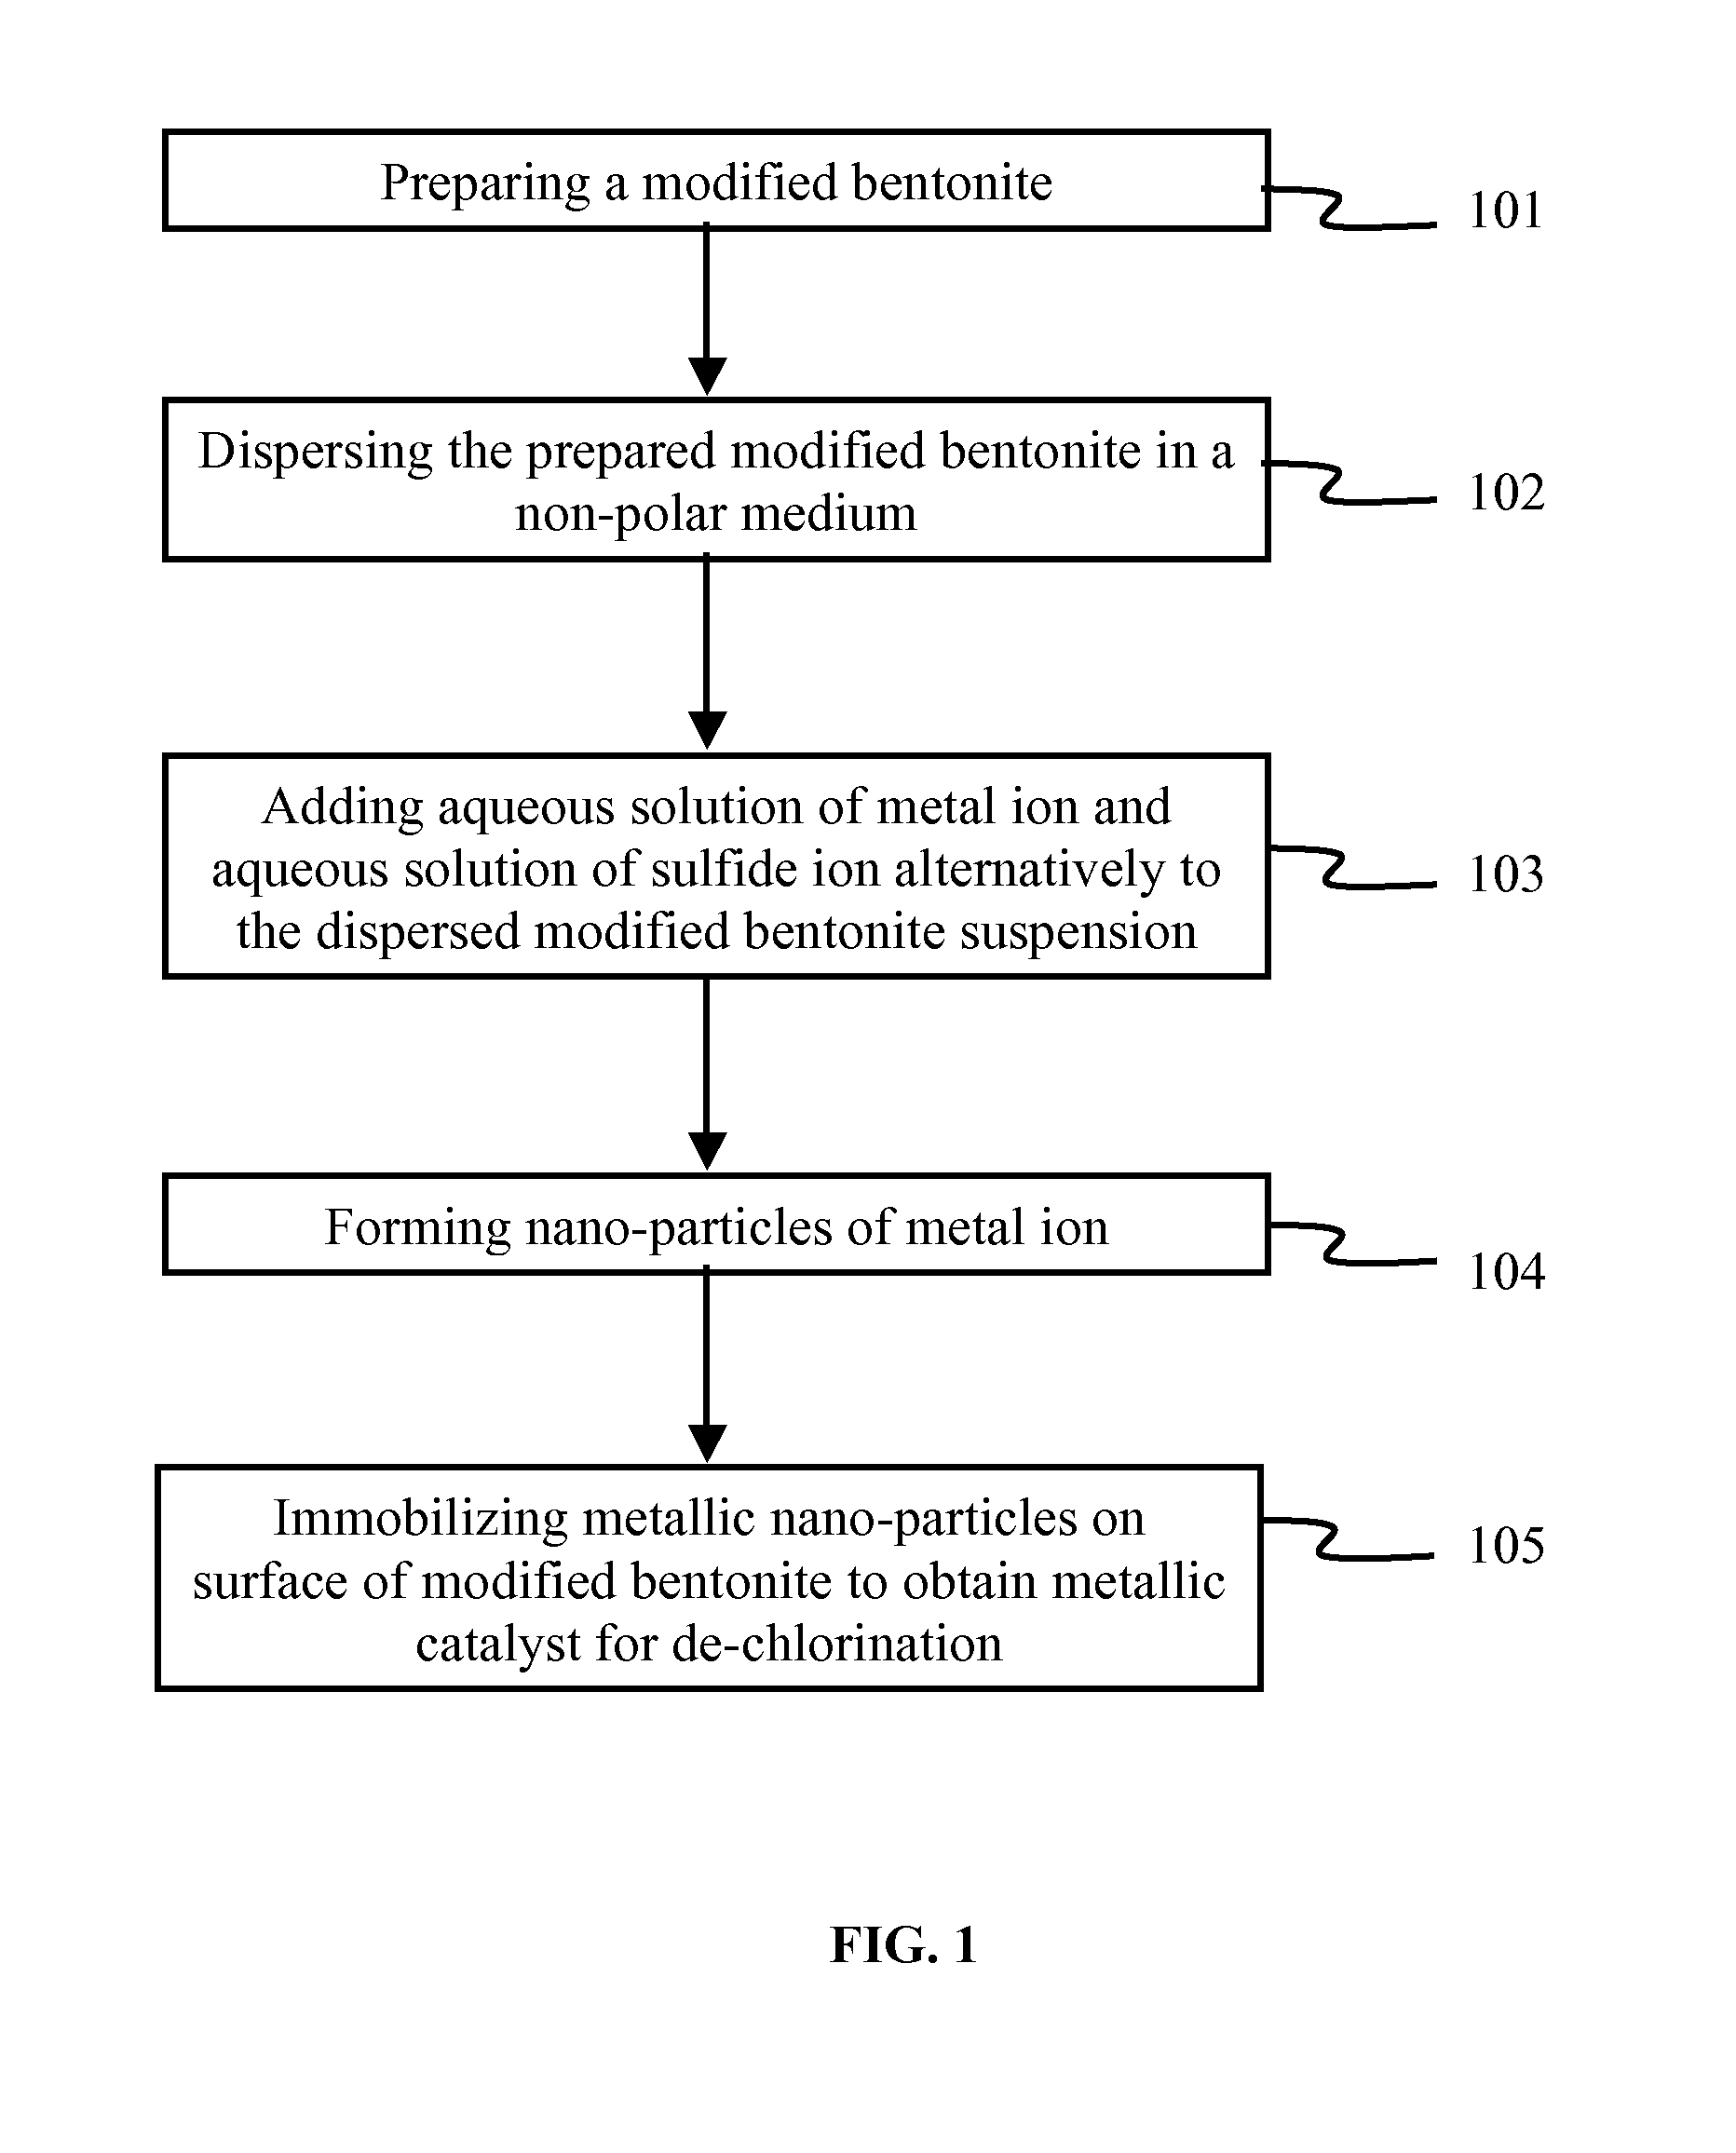 METHOD OF PREPARATION OF ZnS AND CdS NANOPARTICLES FOR DECHLORINATION OF POLYCHLOROBIPHENYLS IN OILS